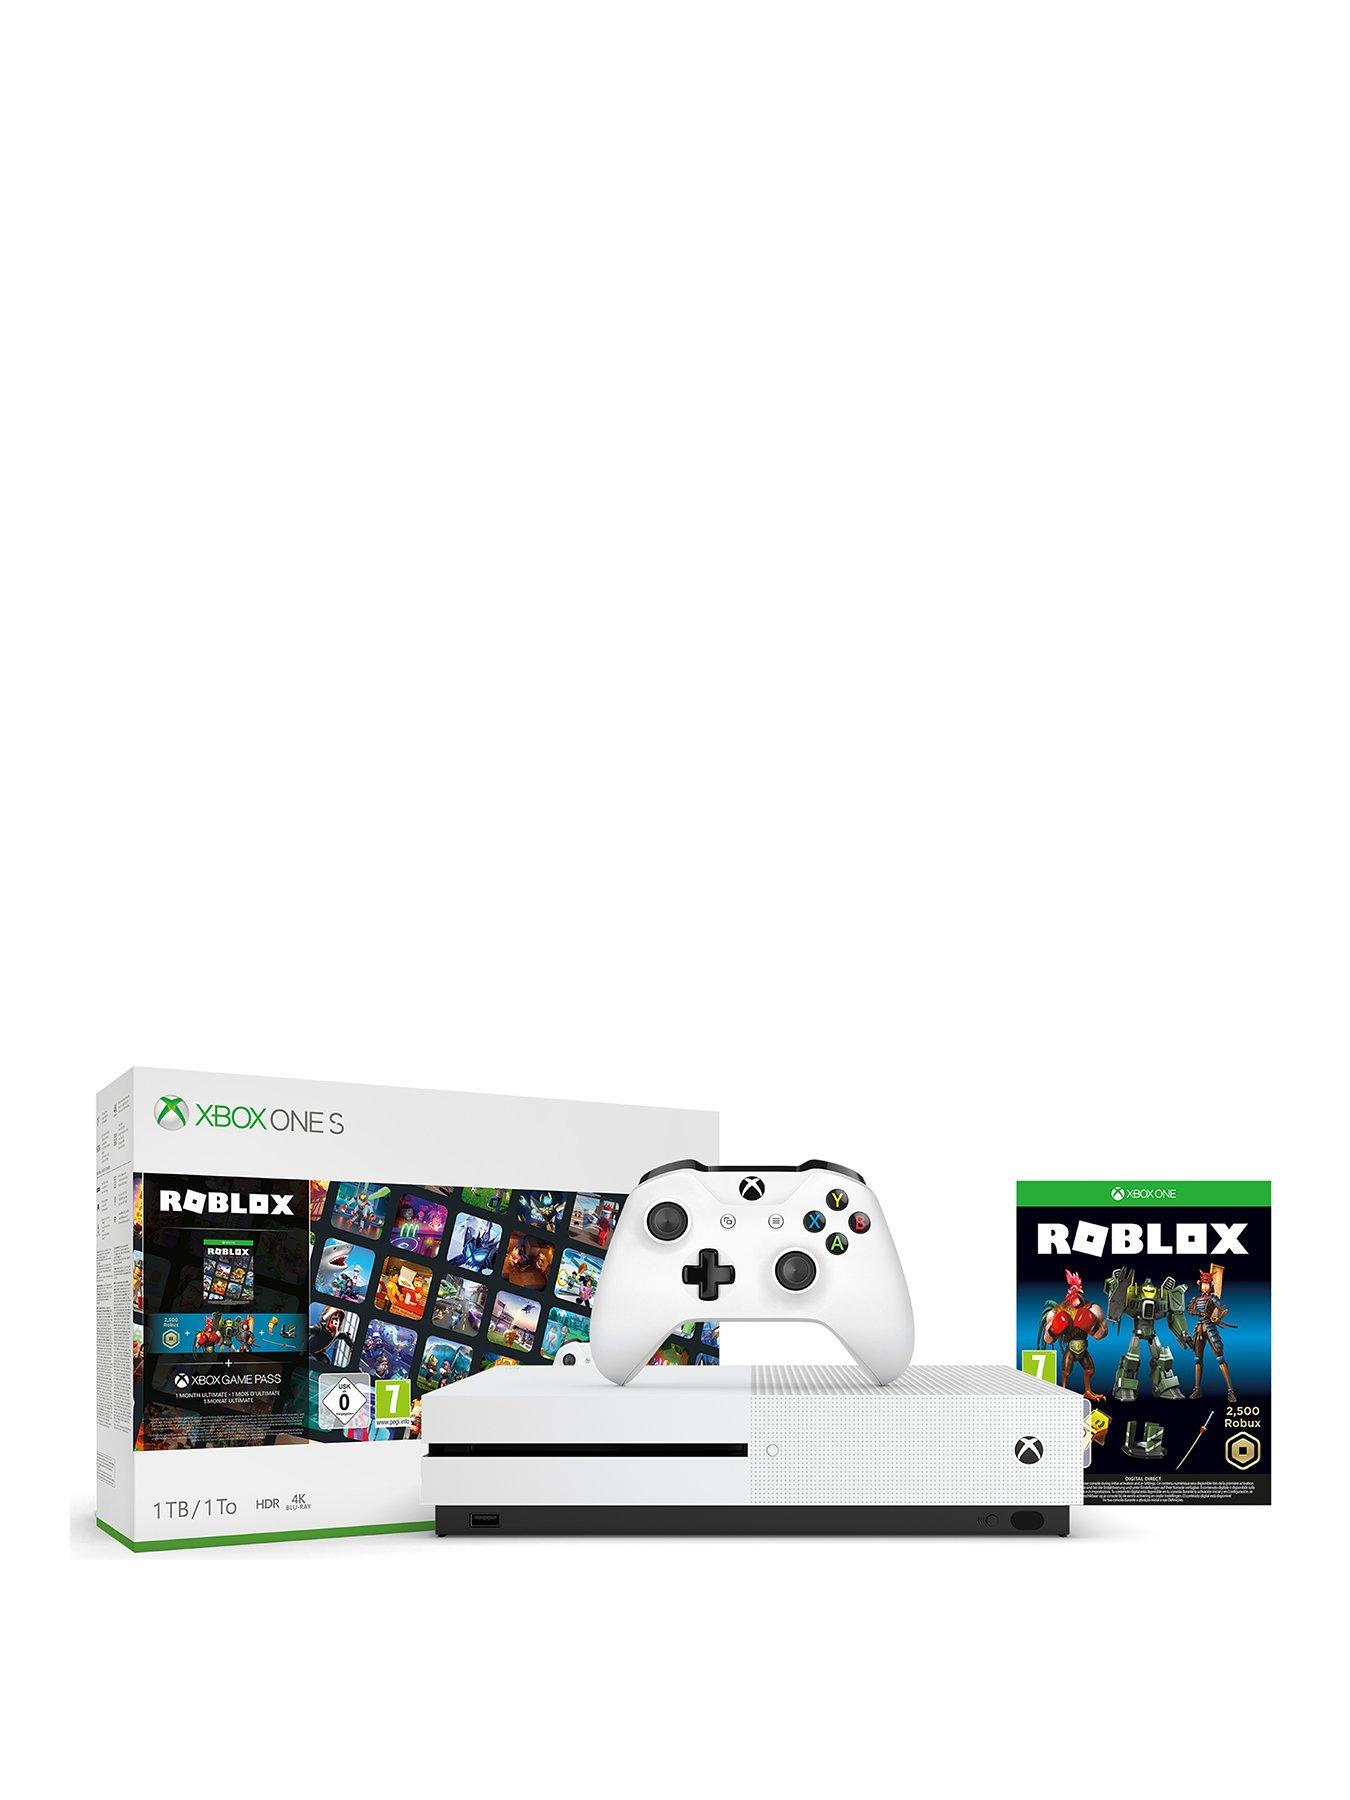 Xbox One S With Roblox Bundle And Optional Extras 1tb Console White Very Co Uk - xbox one pack roblox